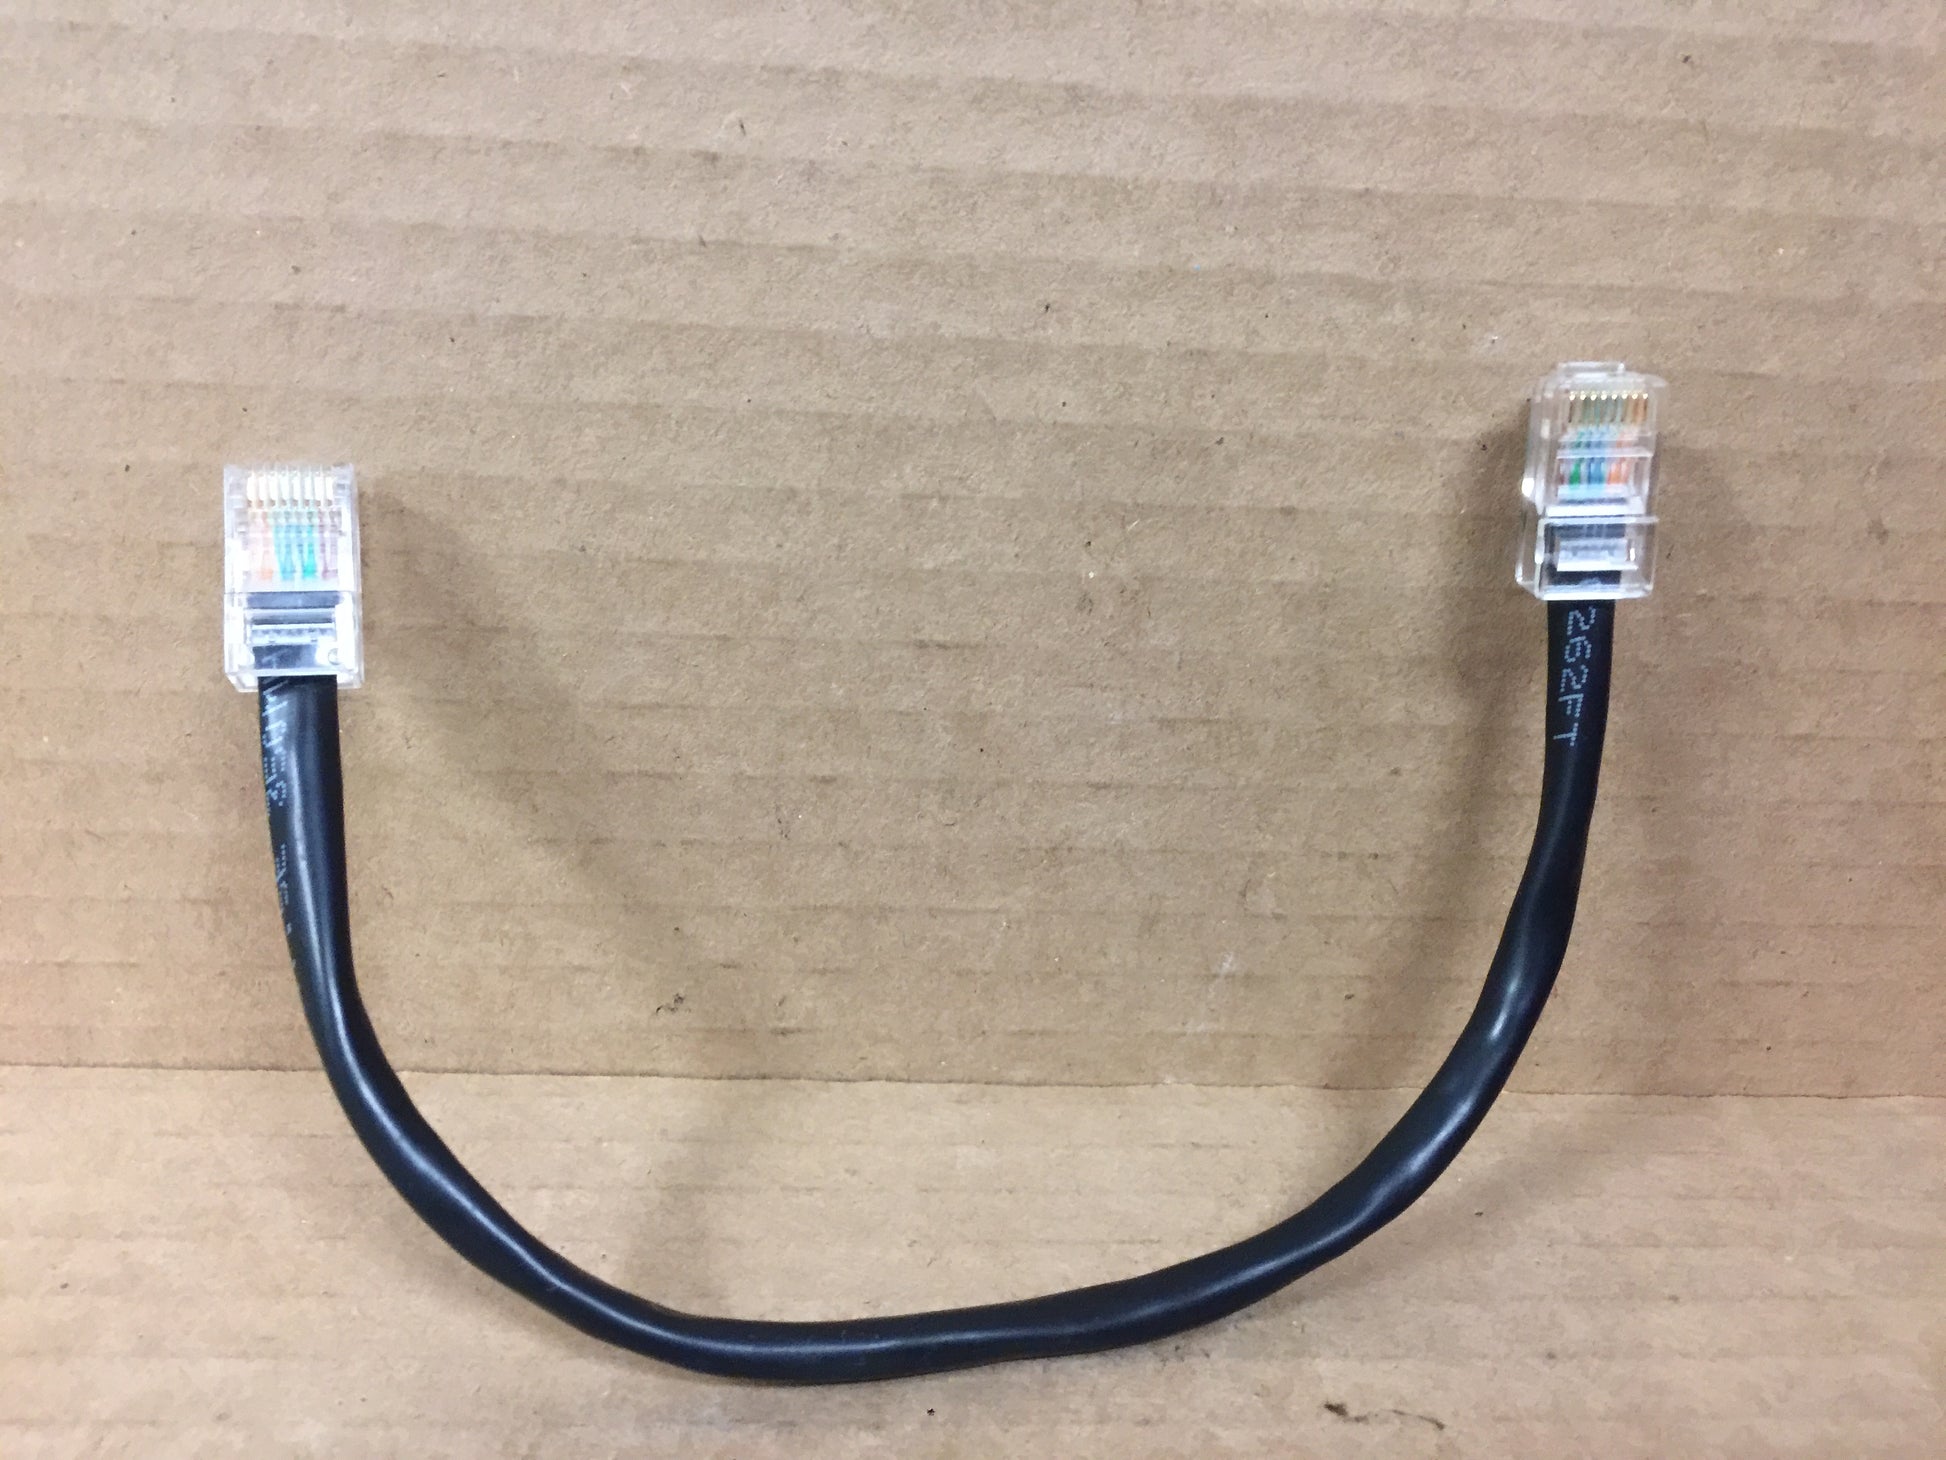 CABLE; RJ45 USED WITH I/O MODULE ON BMTW BCU